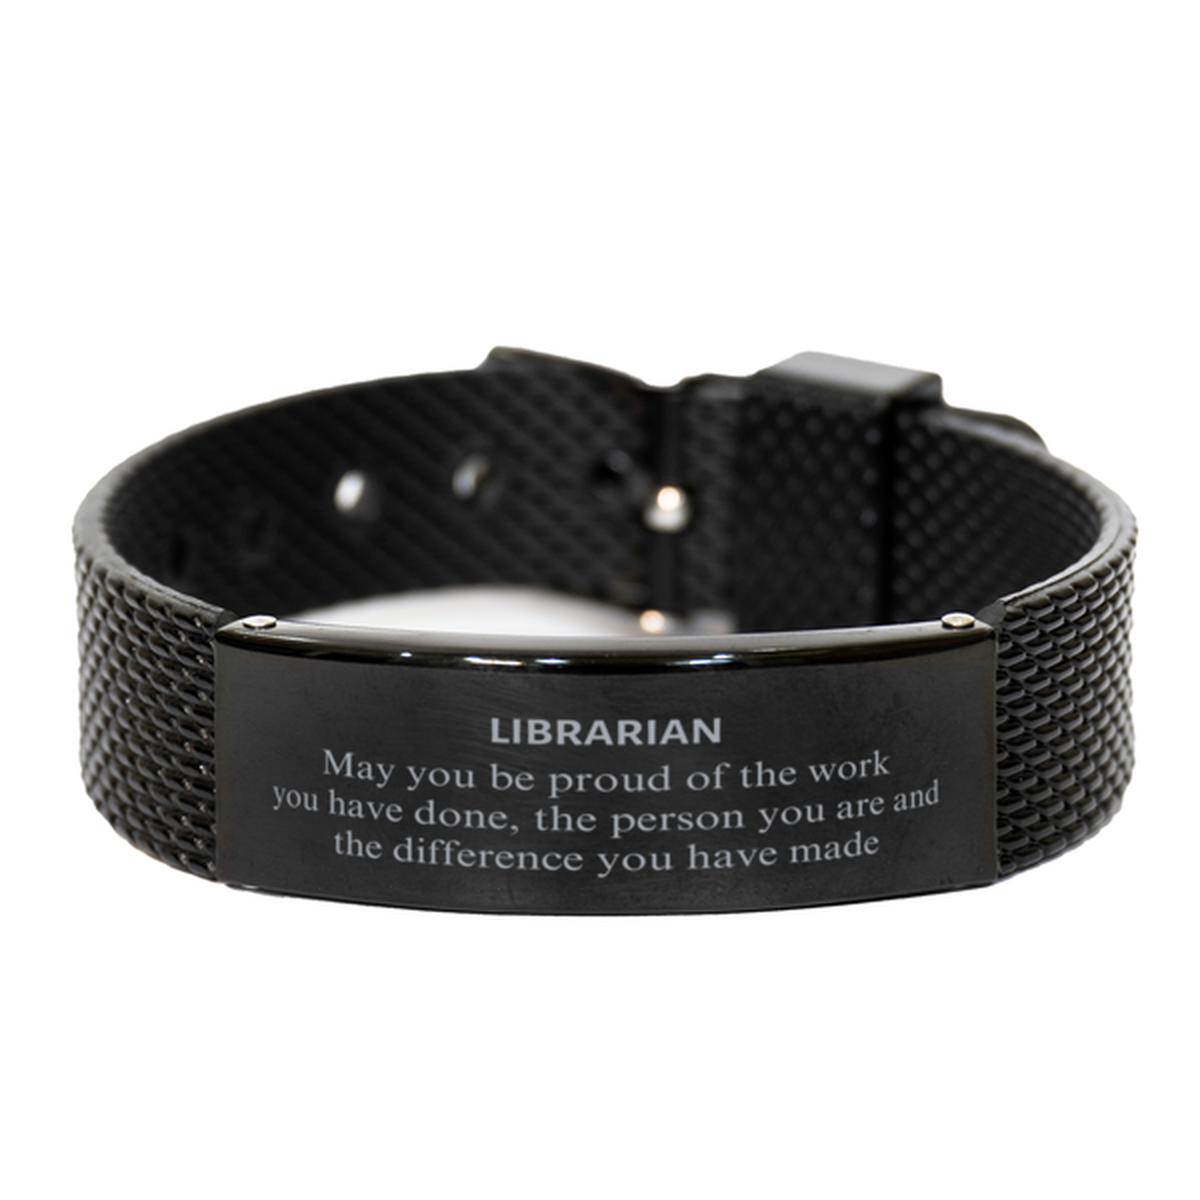 Librarian May you be proud of the work you have done, Retirement Librarian Black Shark Mesh Bracelet for Colleague Appreciation Gifts Amazing for Librarian